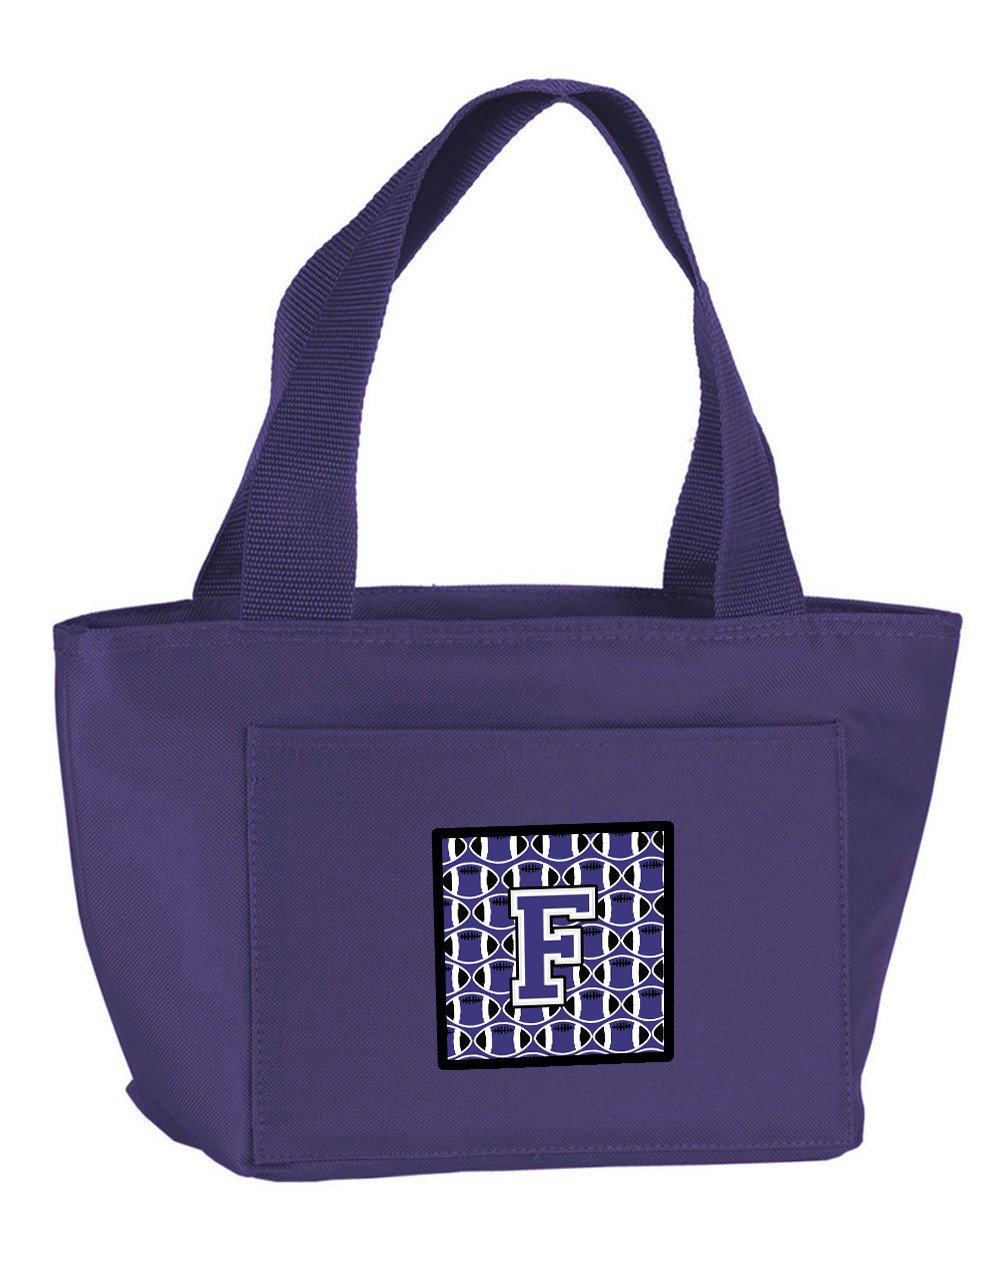 Letter F Football Purple and White Lunch Bag CJ1068-FPR-8808 by Caroline's Treasures